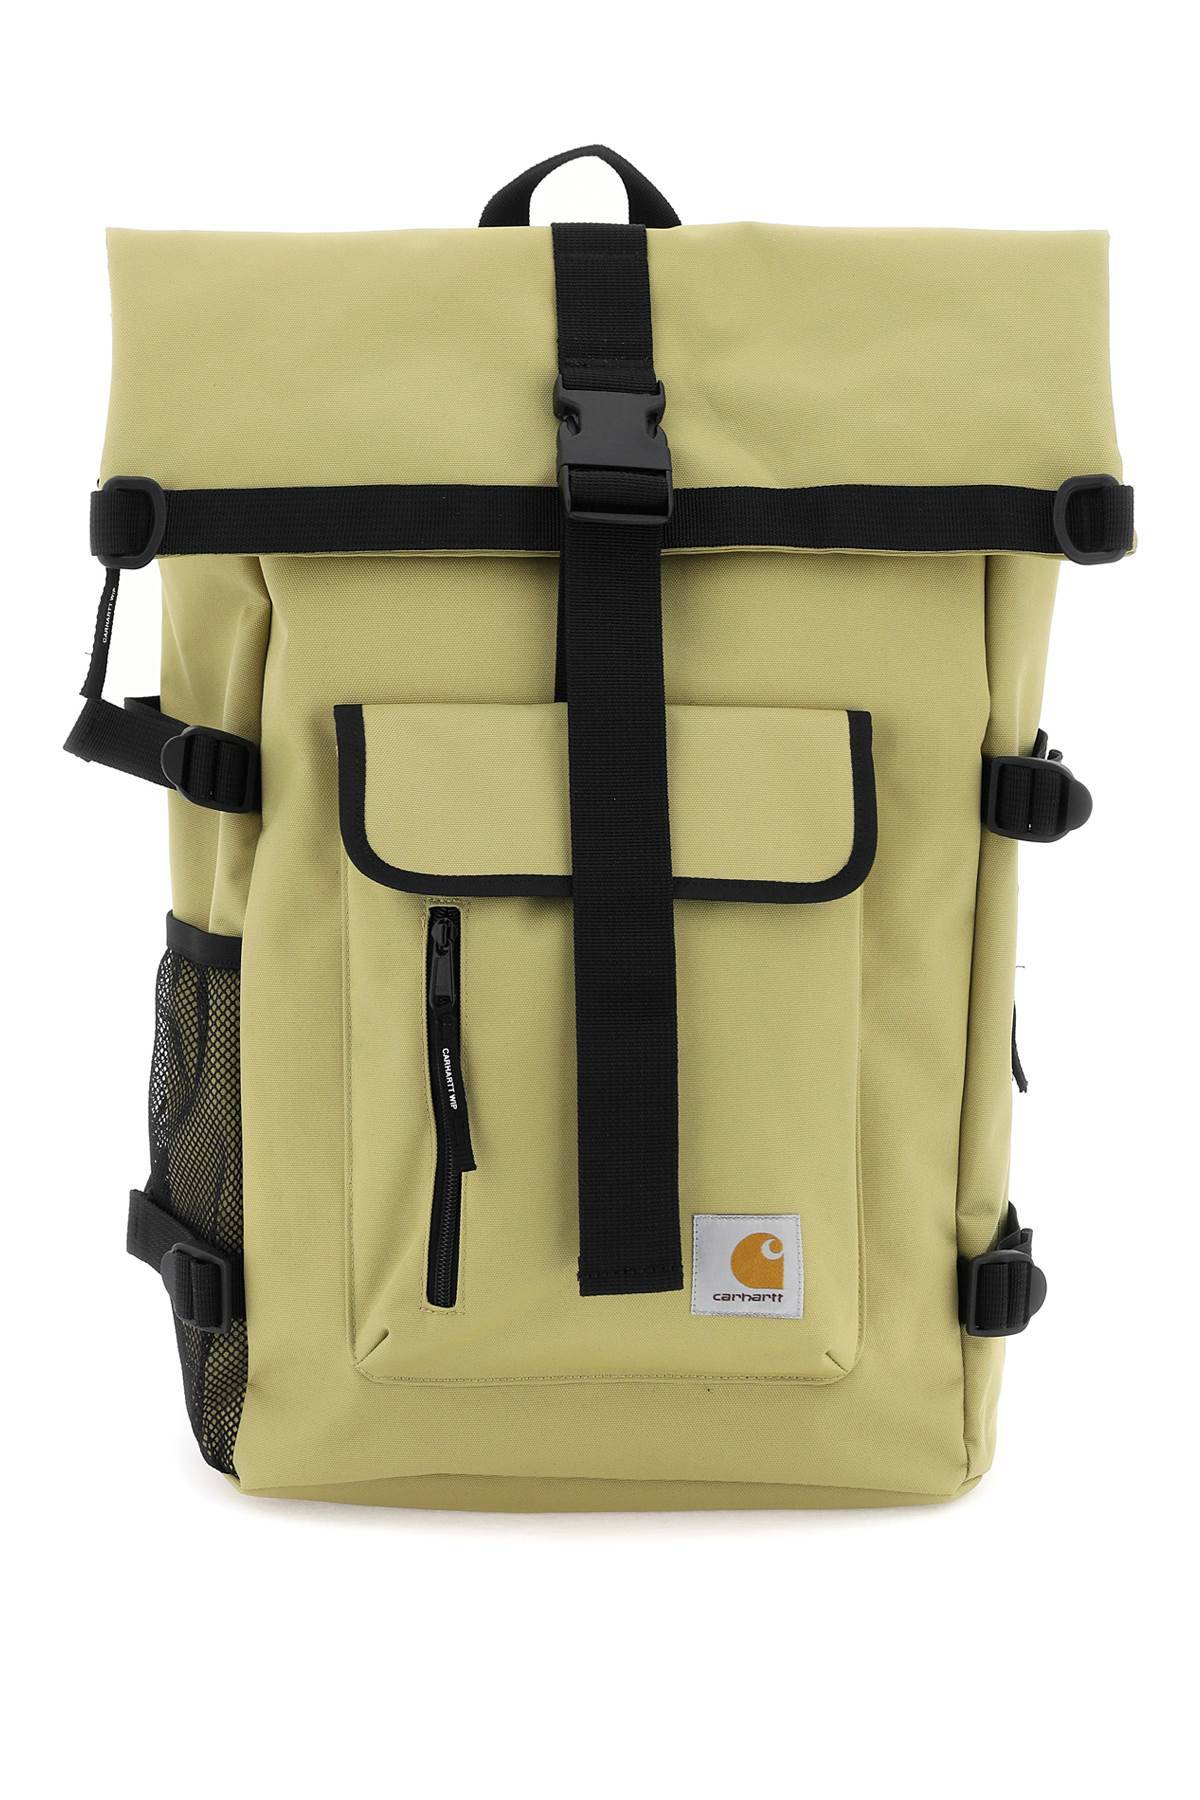 Carhartt WIP CARHARTT WIP "phillis recycled technical canvas backpack